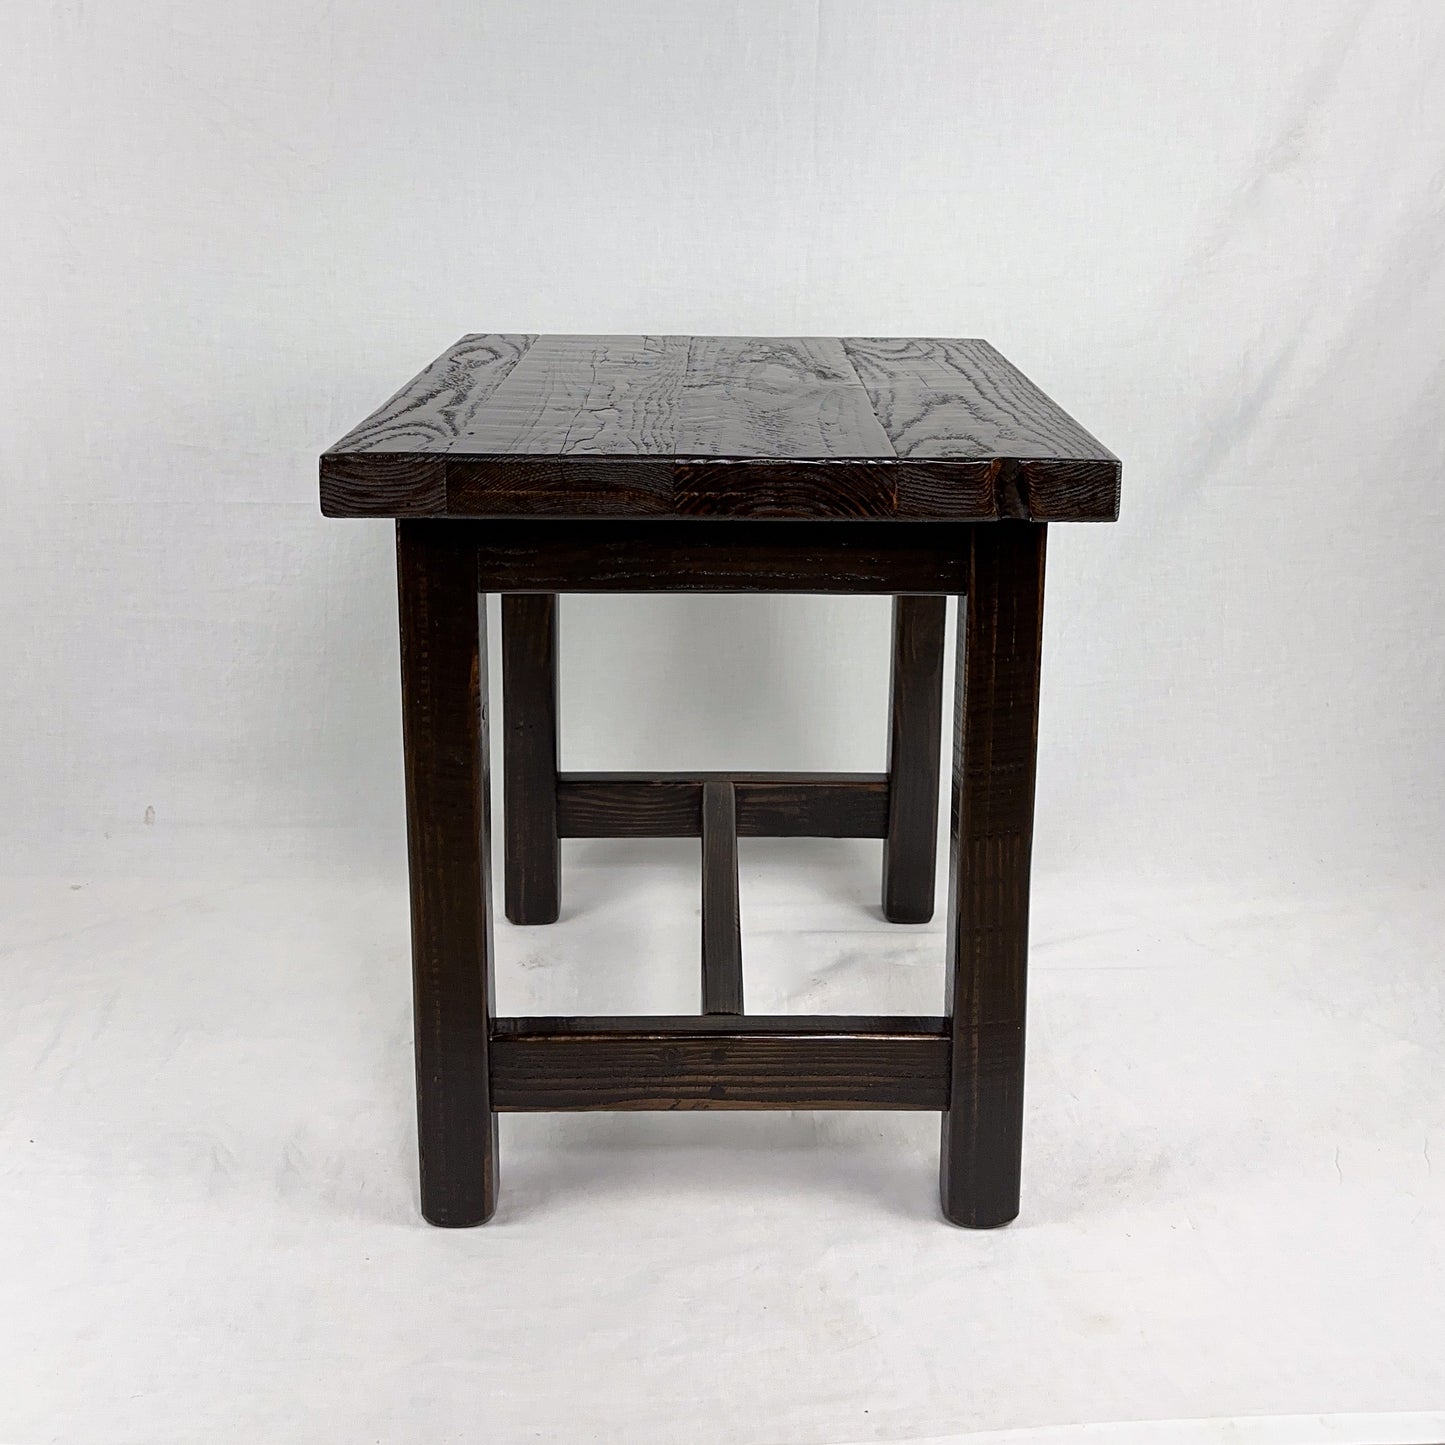 Bitterroot End Table